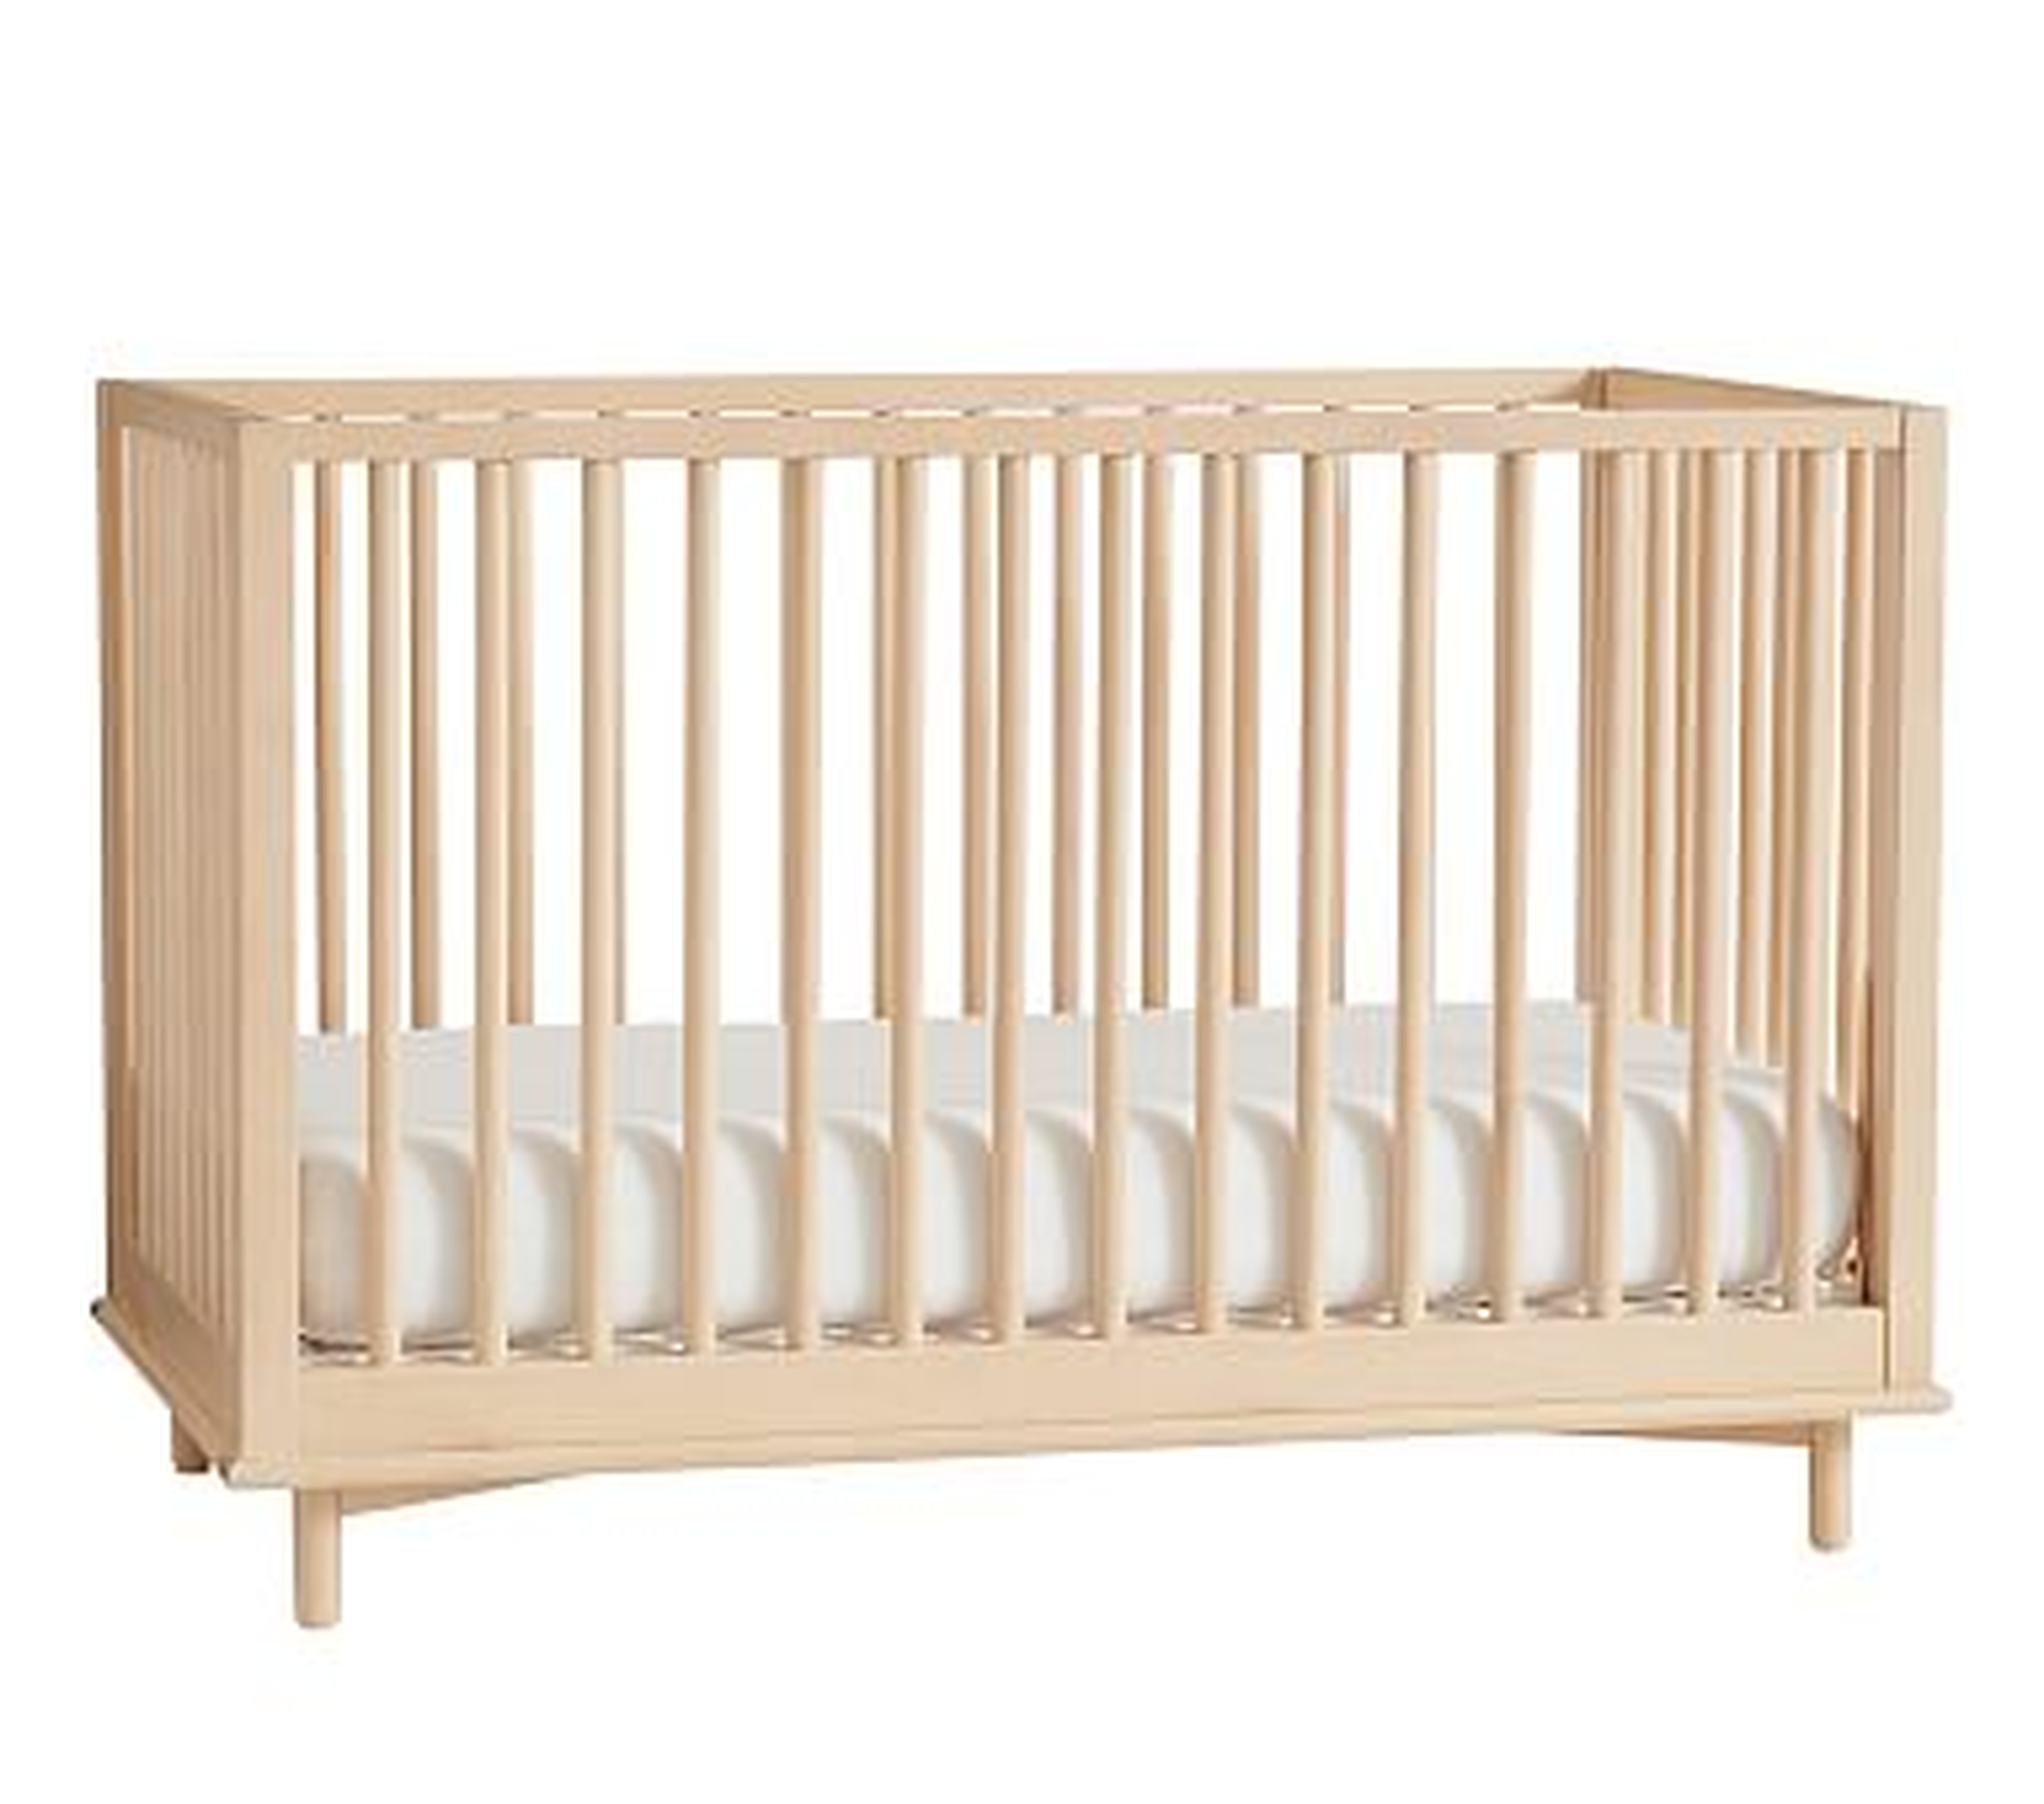 Nash Crib, Natural, Unlimited Flat Rate Delivery - Pottery Barn Kids